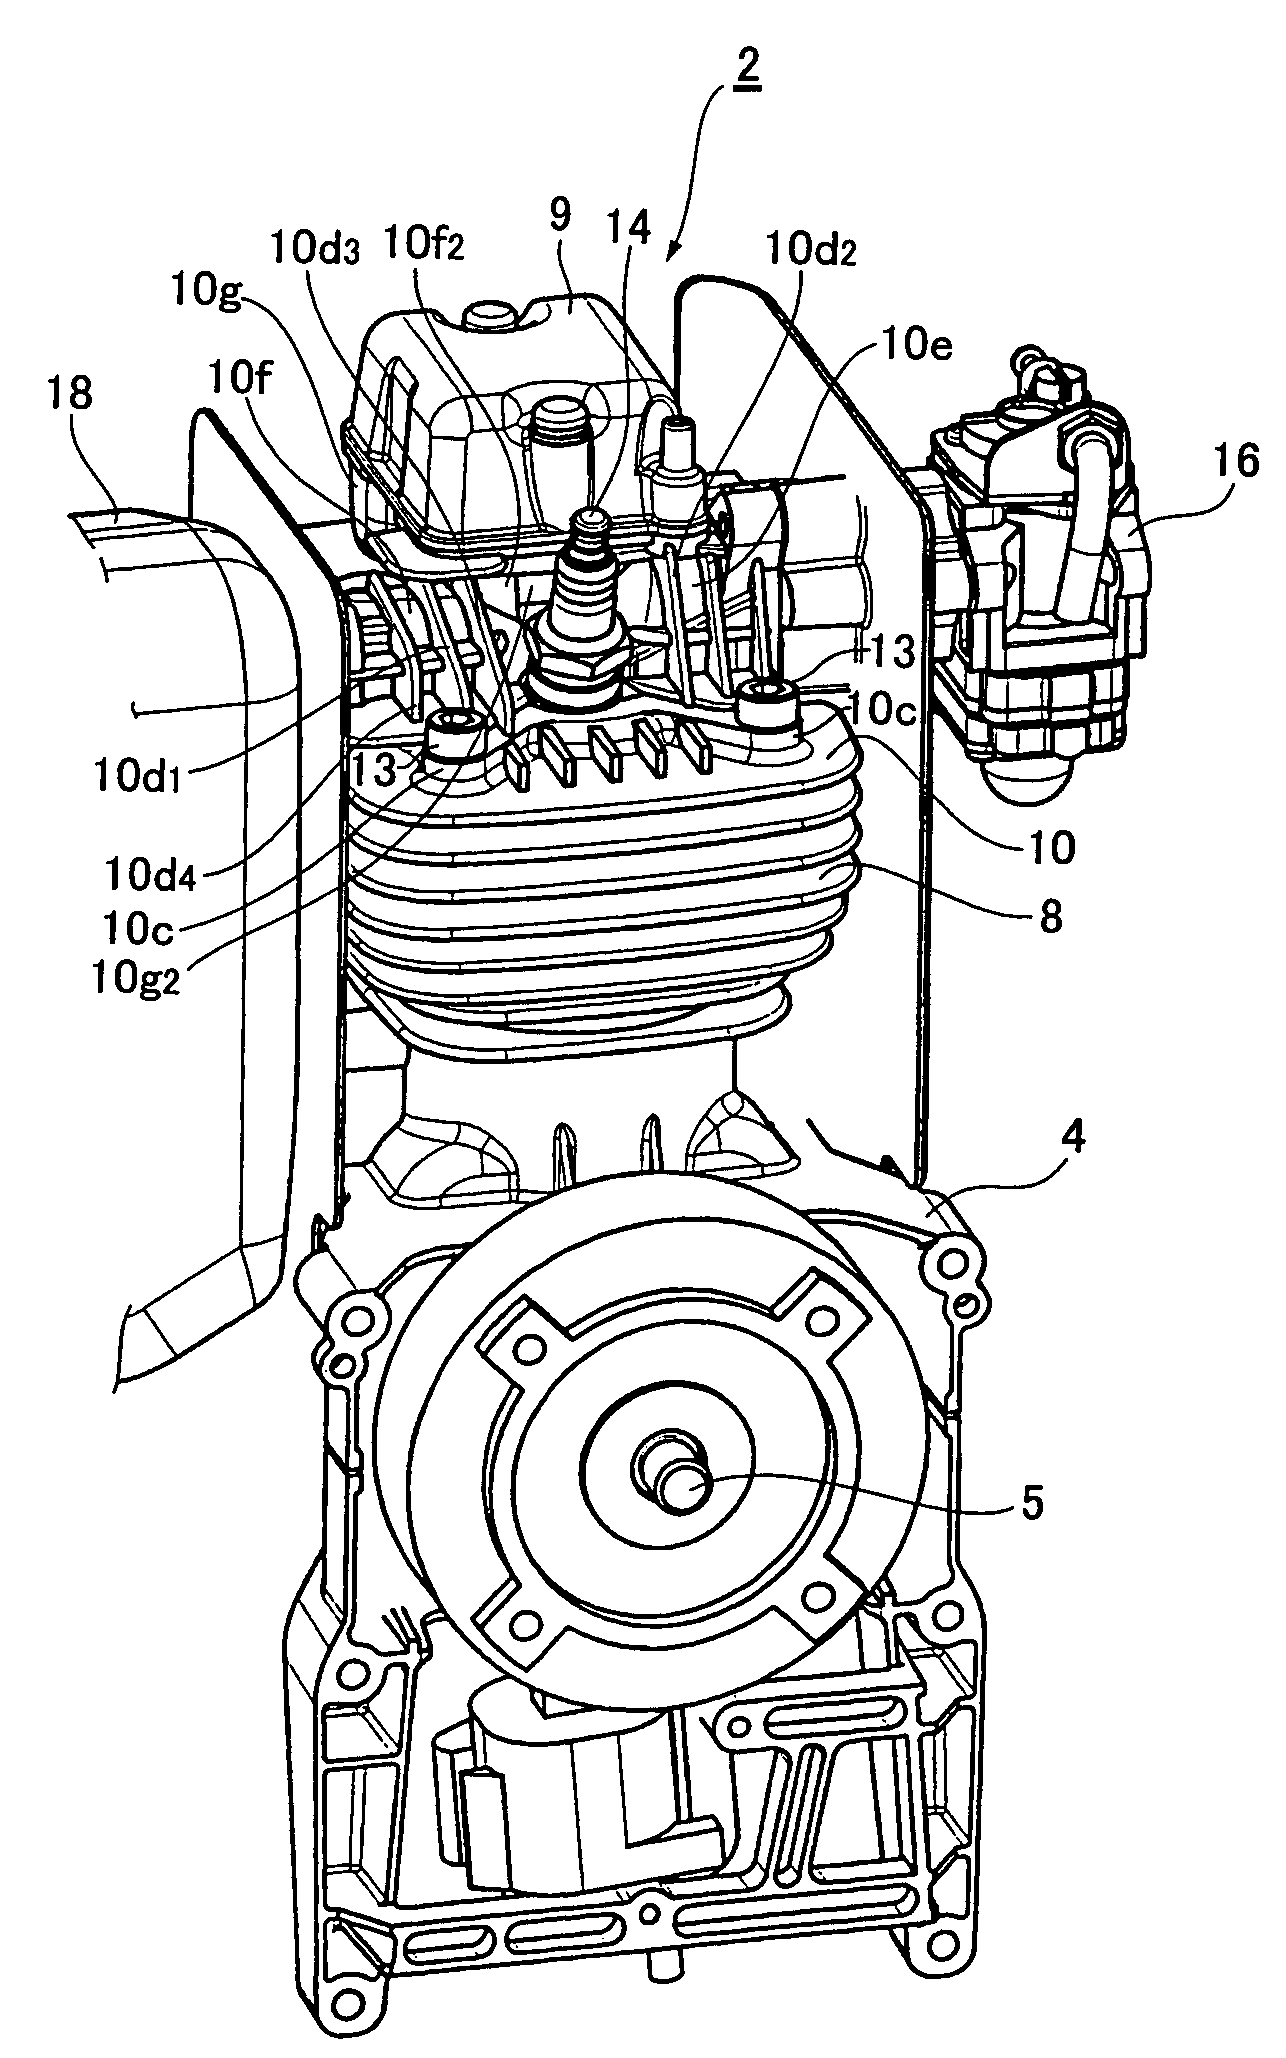 Portable 4-cycle engine and portable machine equipped with the 4-cycle engine